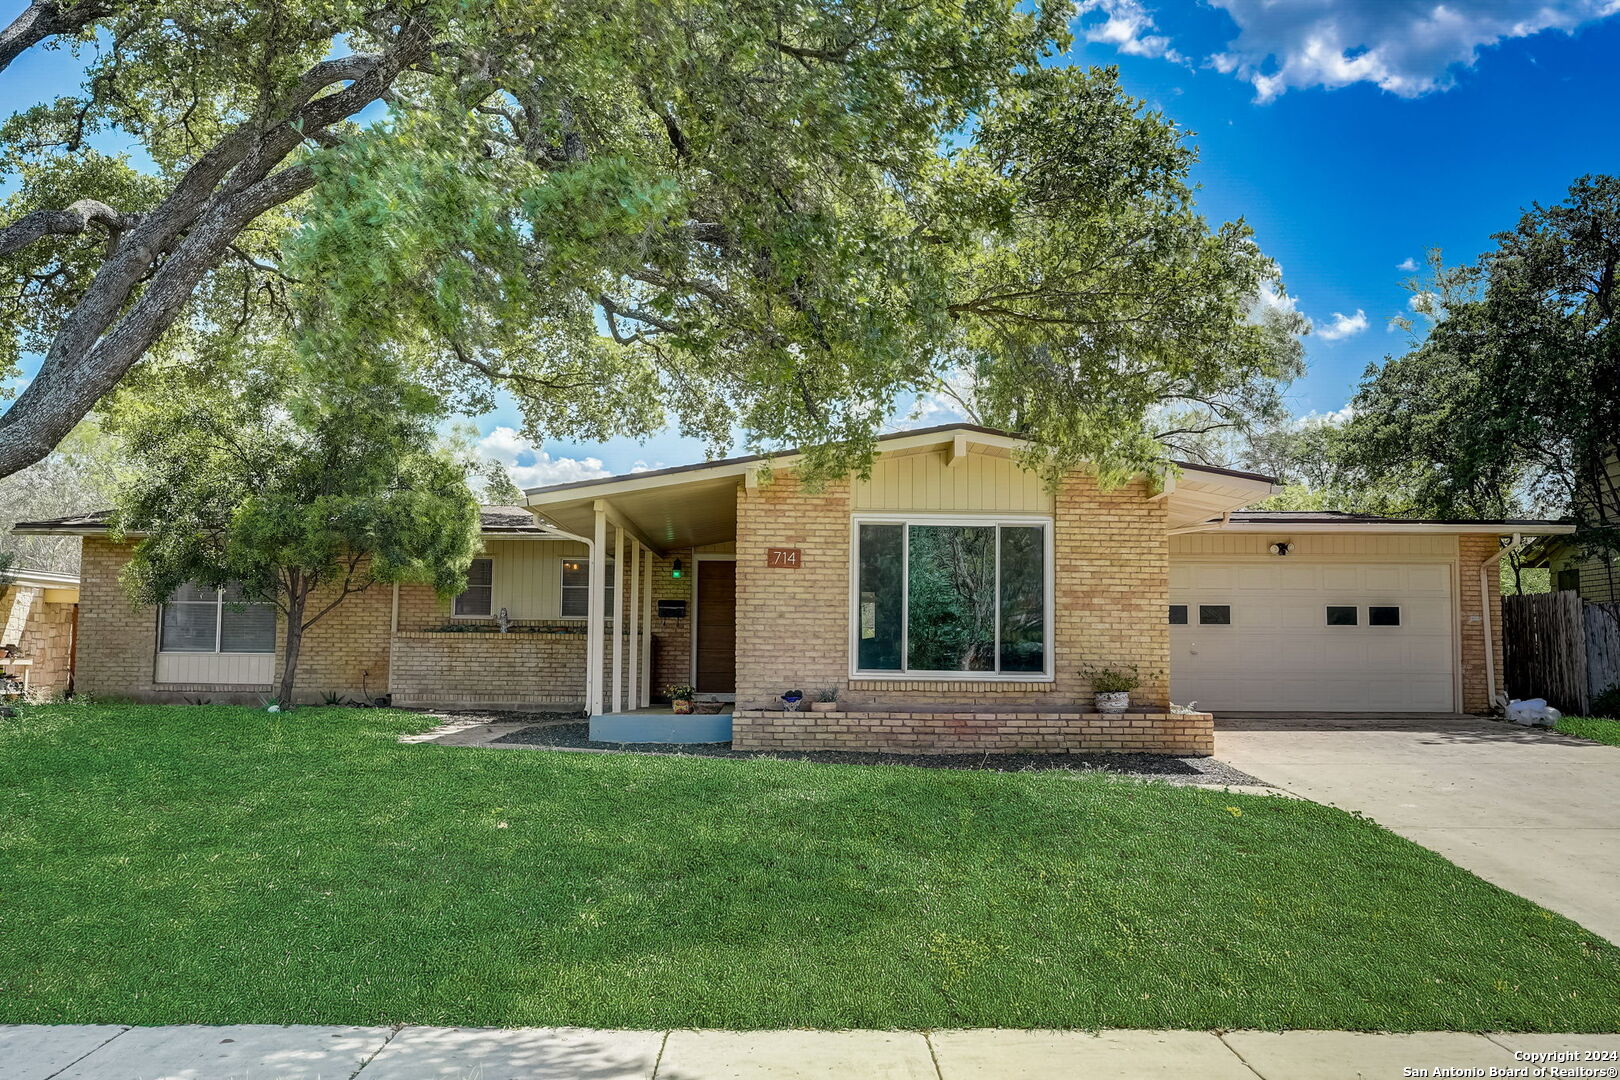 Photo of 714 Barchester Dr in San Antonio, TX